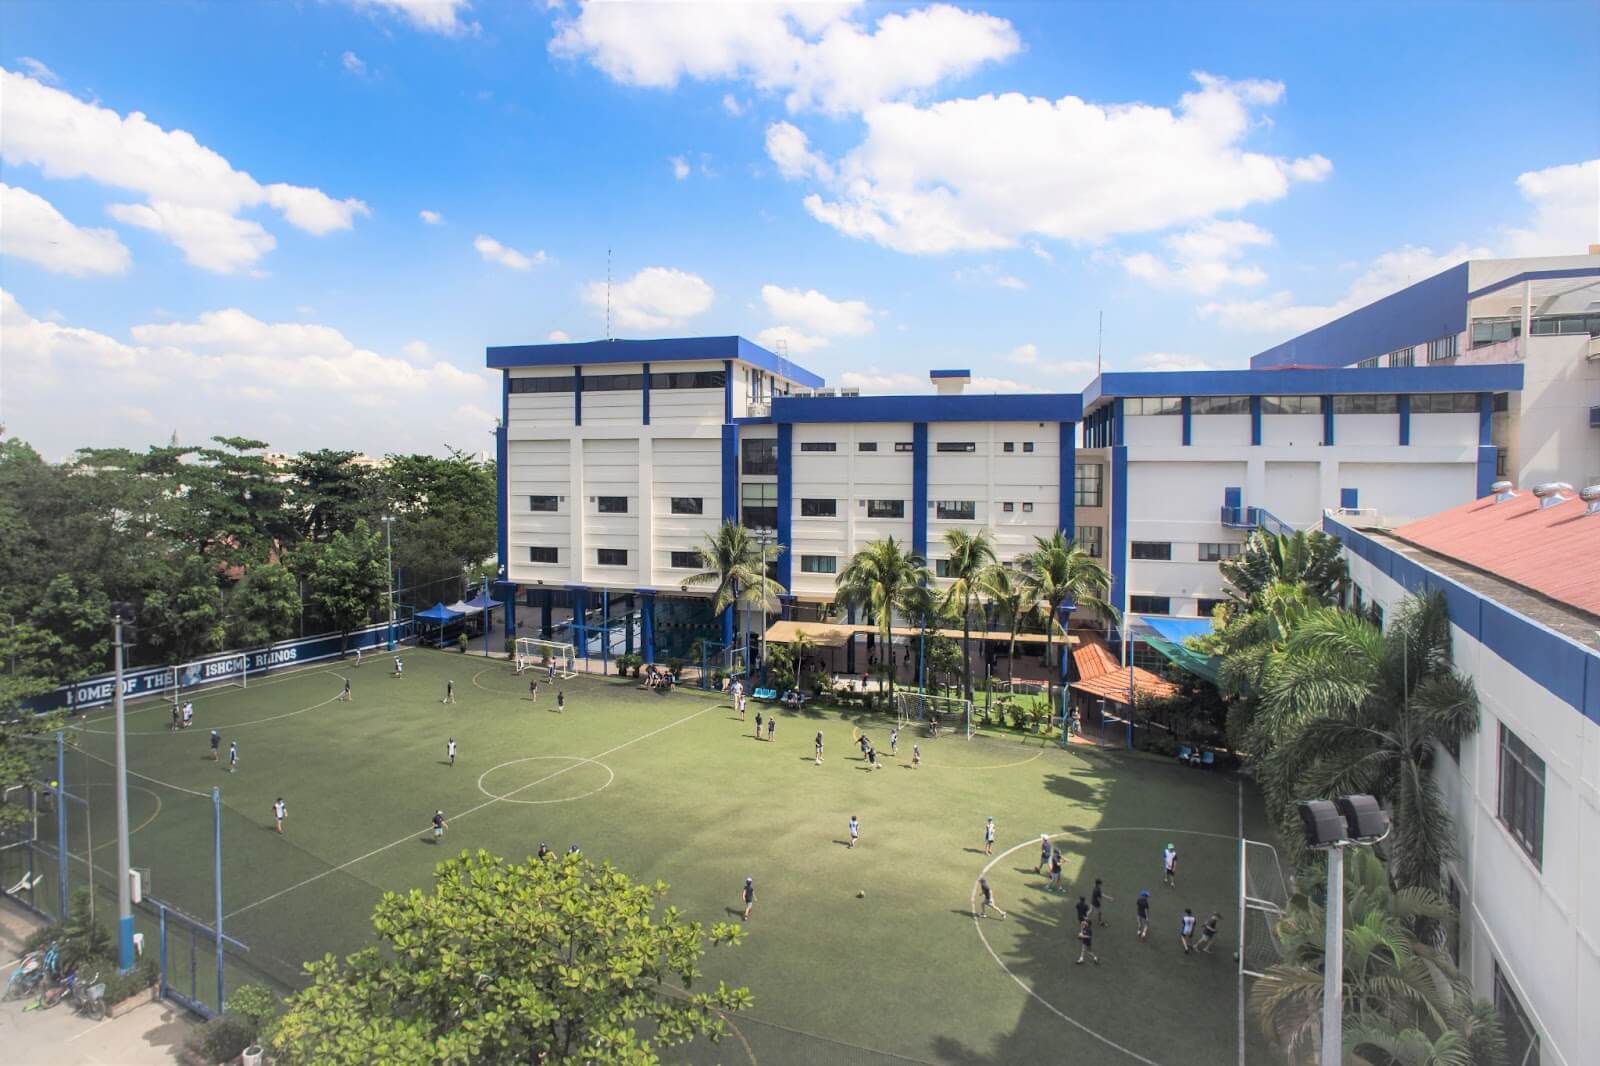 The primary campus of the International School Ho Chi Minh City